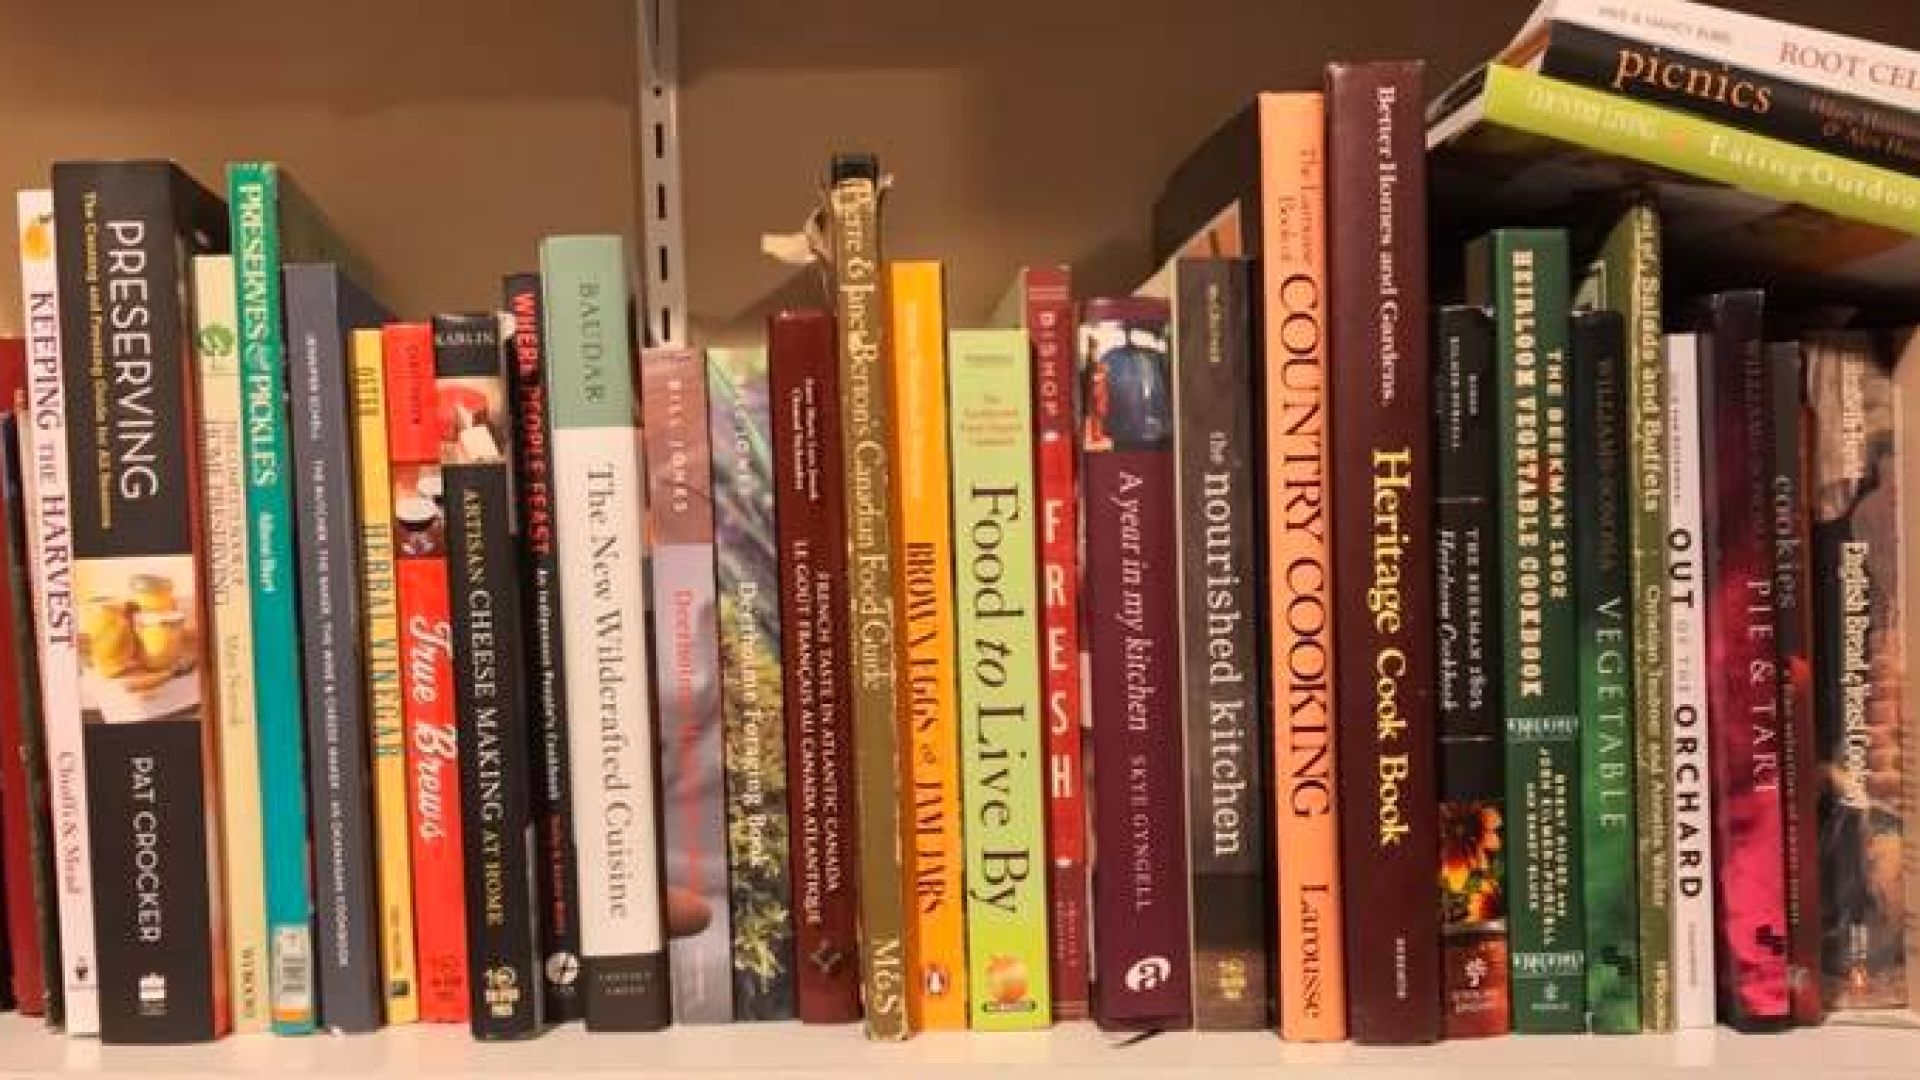 books about food, recipes, cooking etc